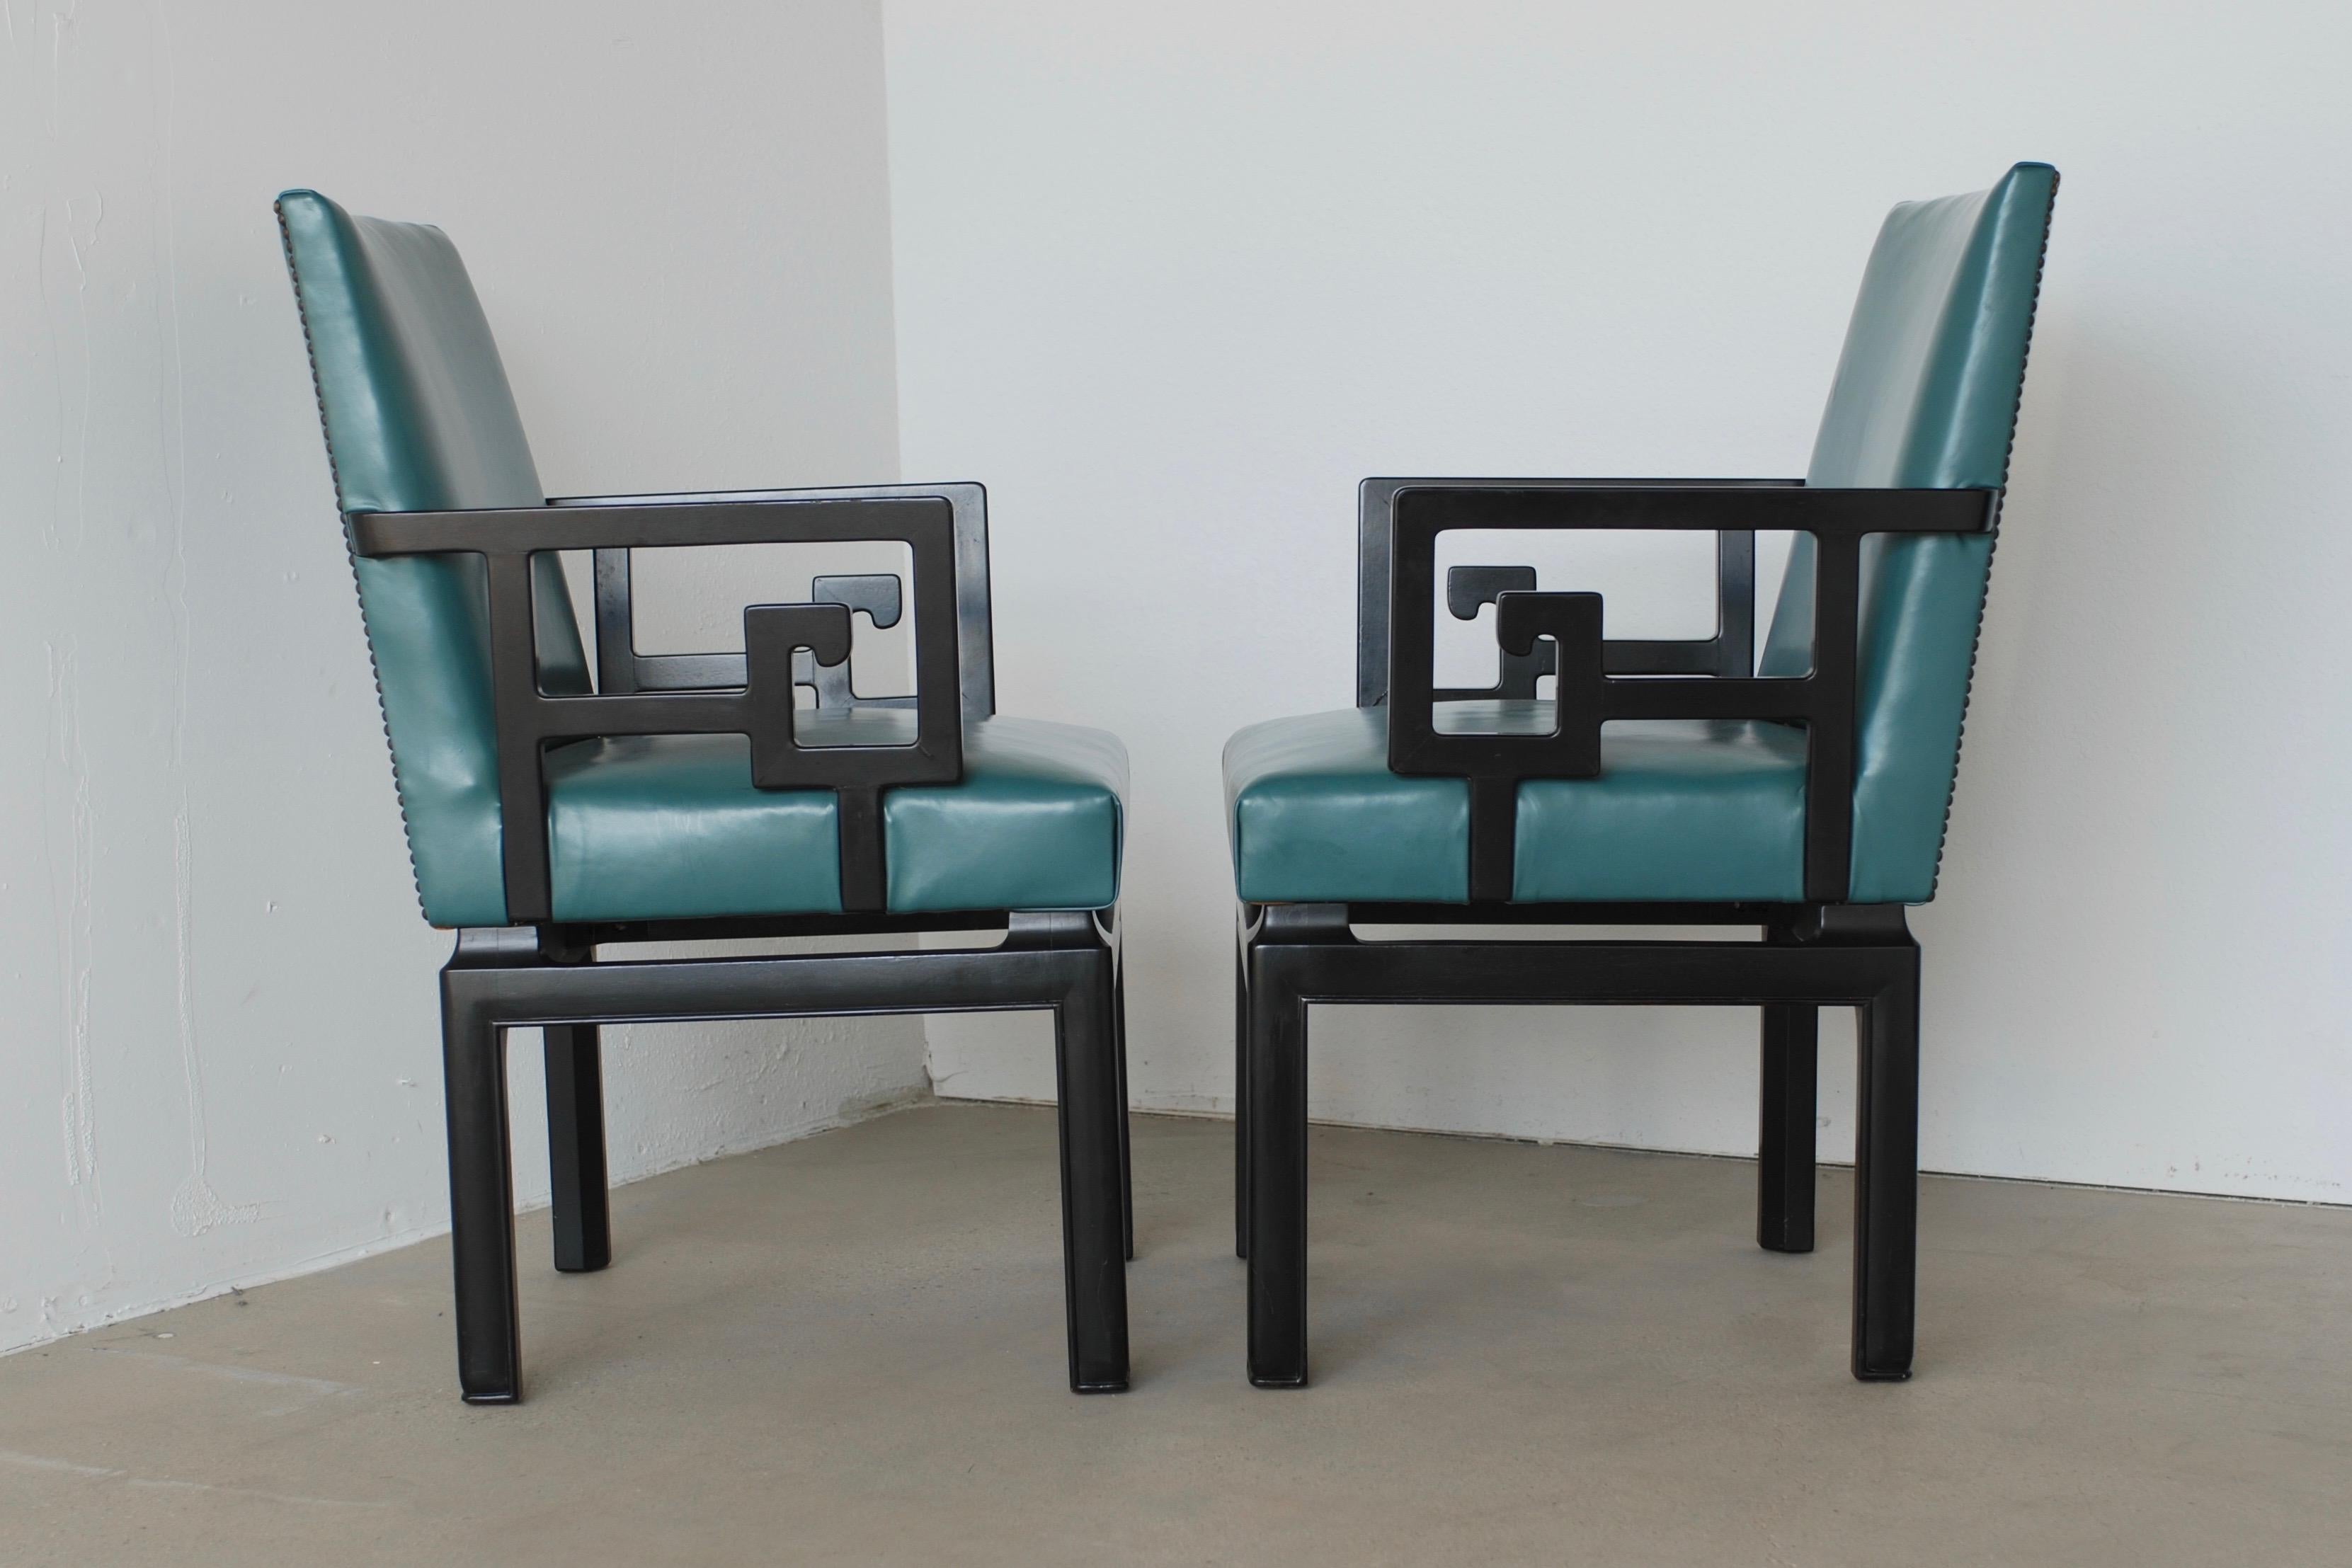 These teal or turquoise colored leather and ebony black lacquered wood dining chairs by Baker are attributed to Michael Taylor. The captains chairs have a greek key pattern and the four side chairs are armless. The chairs retain their original Baker